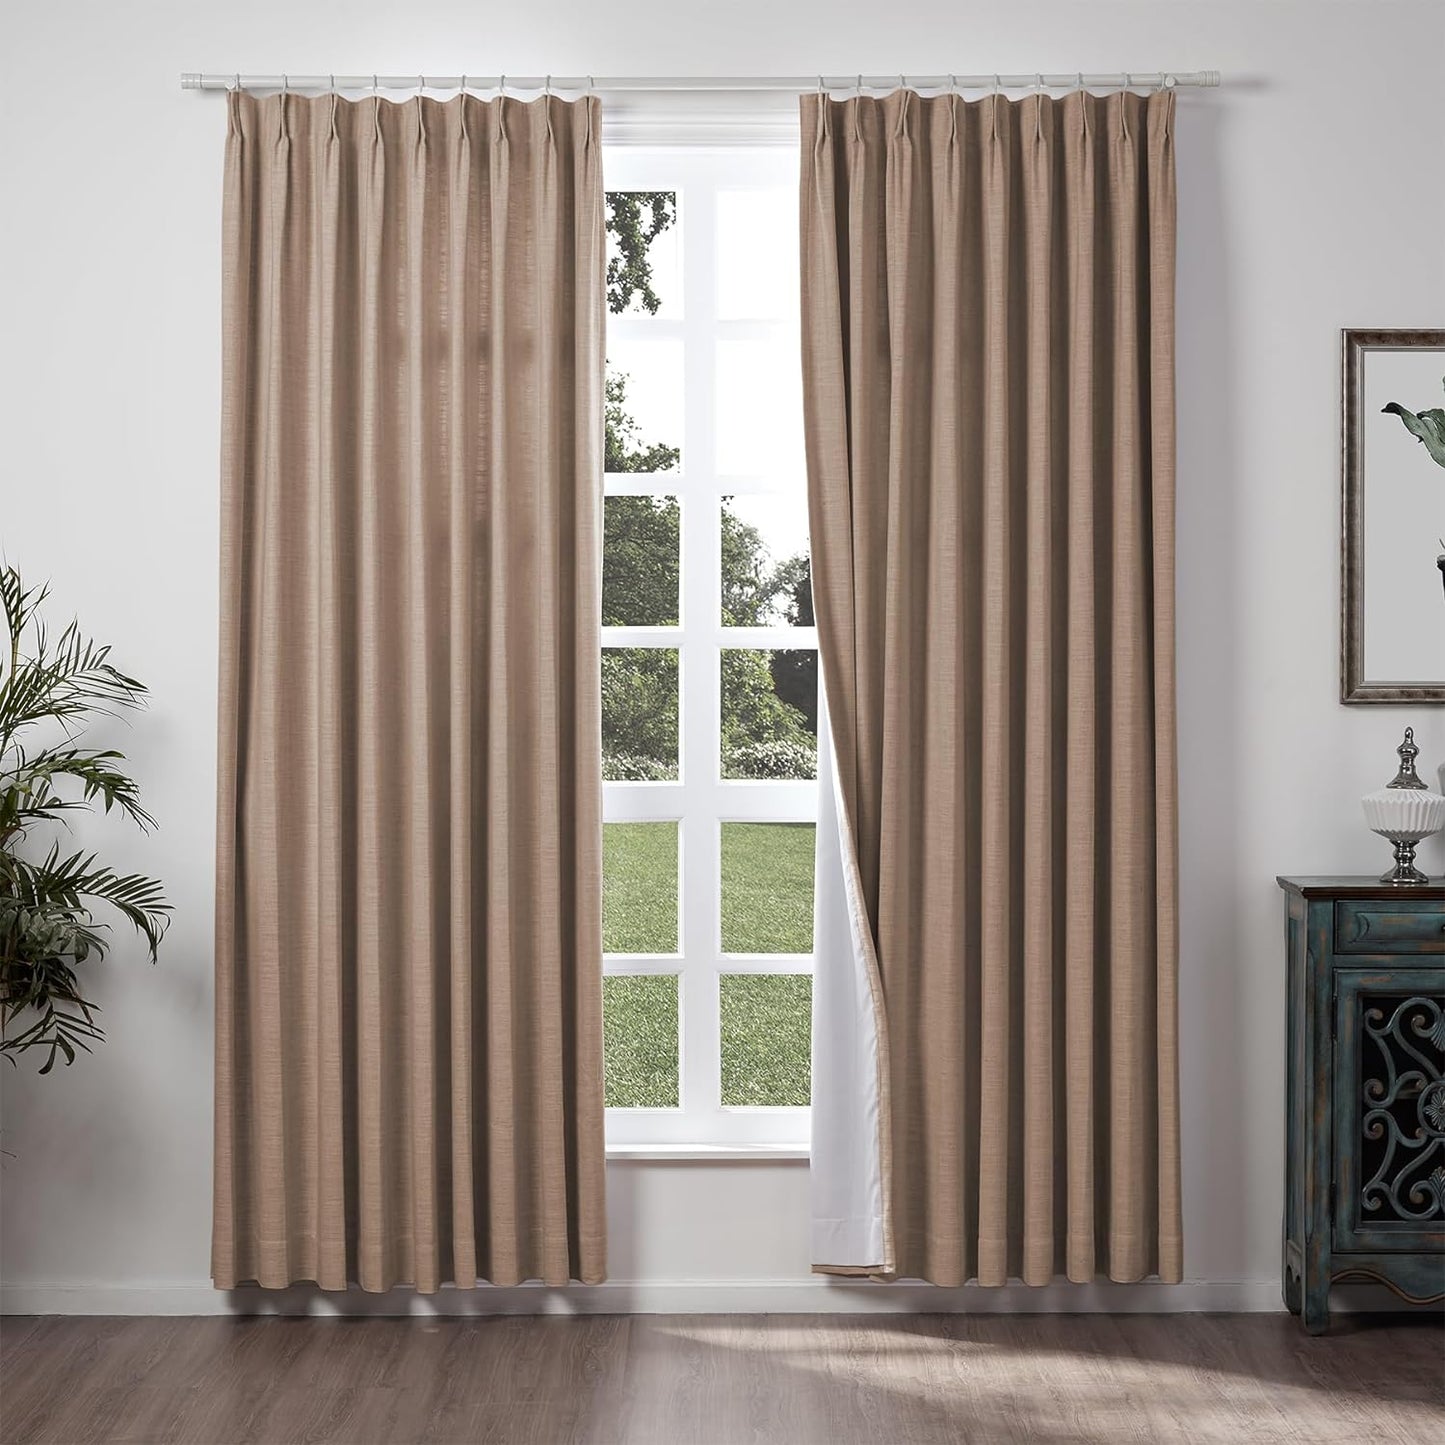 Chadmade 50" W X 84" L Polyester Linen Drape with Blackout Lining Pinch Pleat Curtain for Sliding Door Patio Door Living Room Bedroom, (1 Panel) Beige White Liz Collection  ChadMade Rust Brown (9) 100Wx96L 